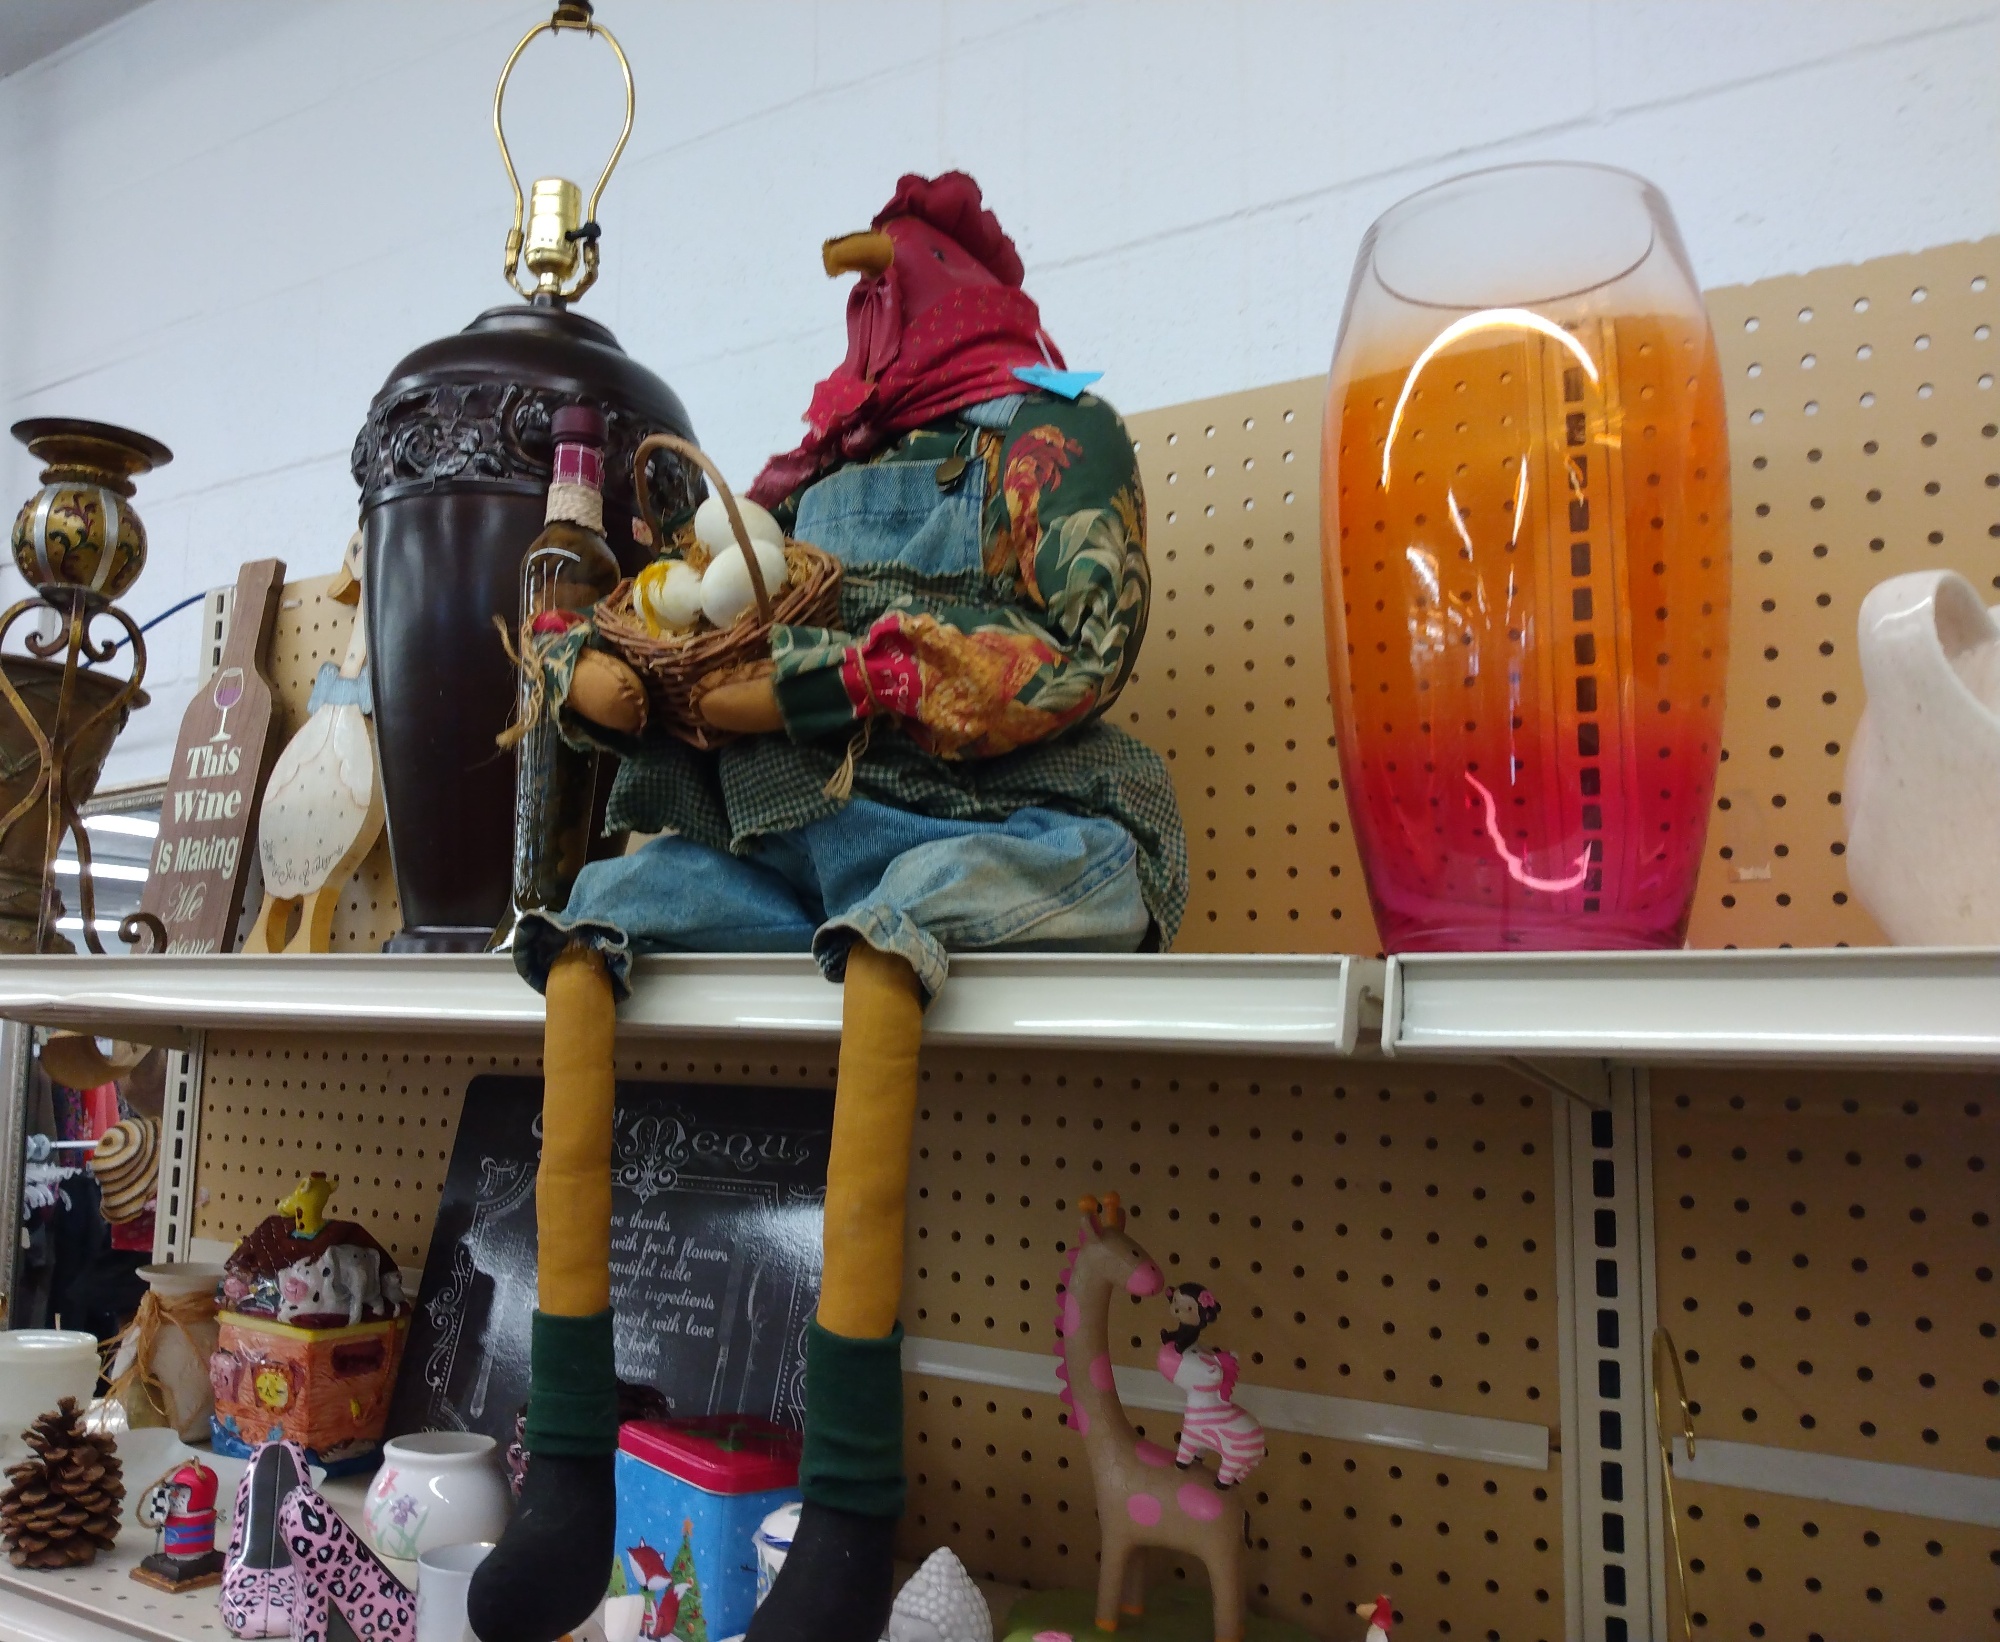 An image of unique lamps sitting on a shelf at a thrift store